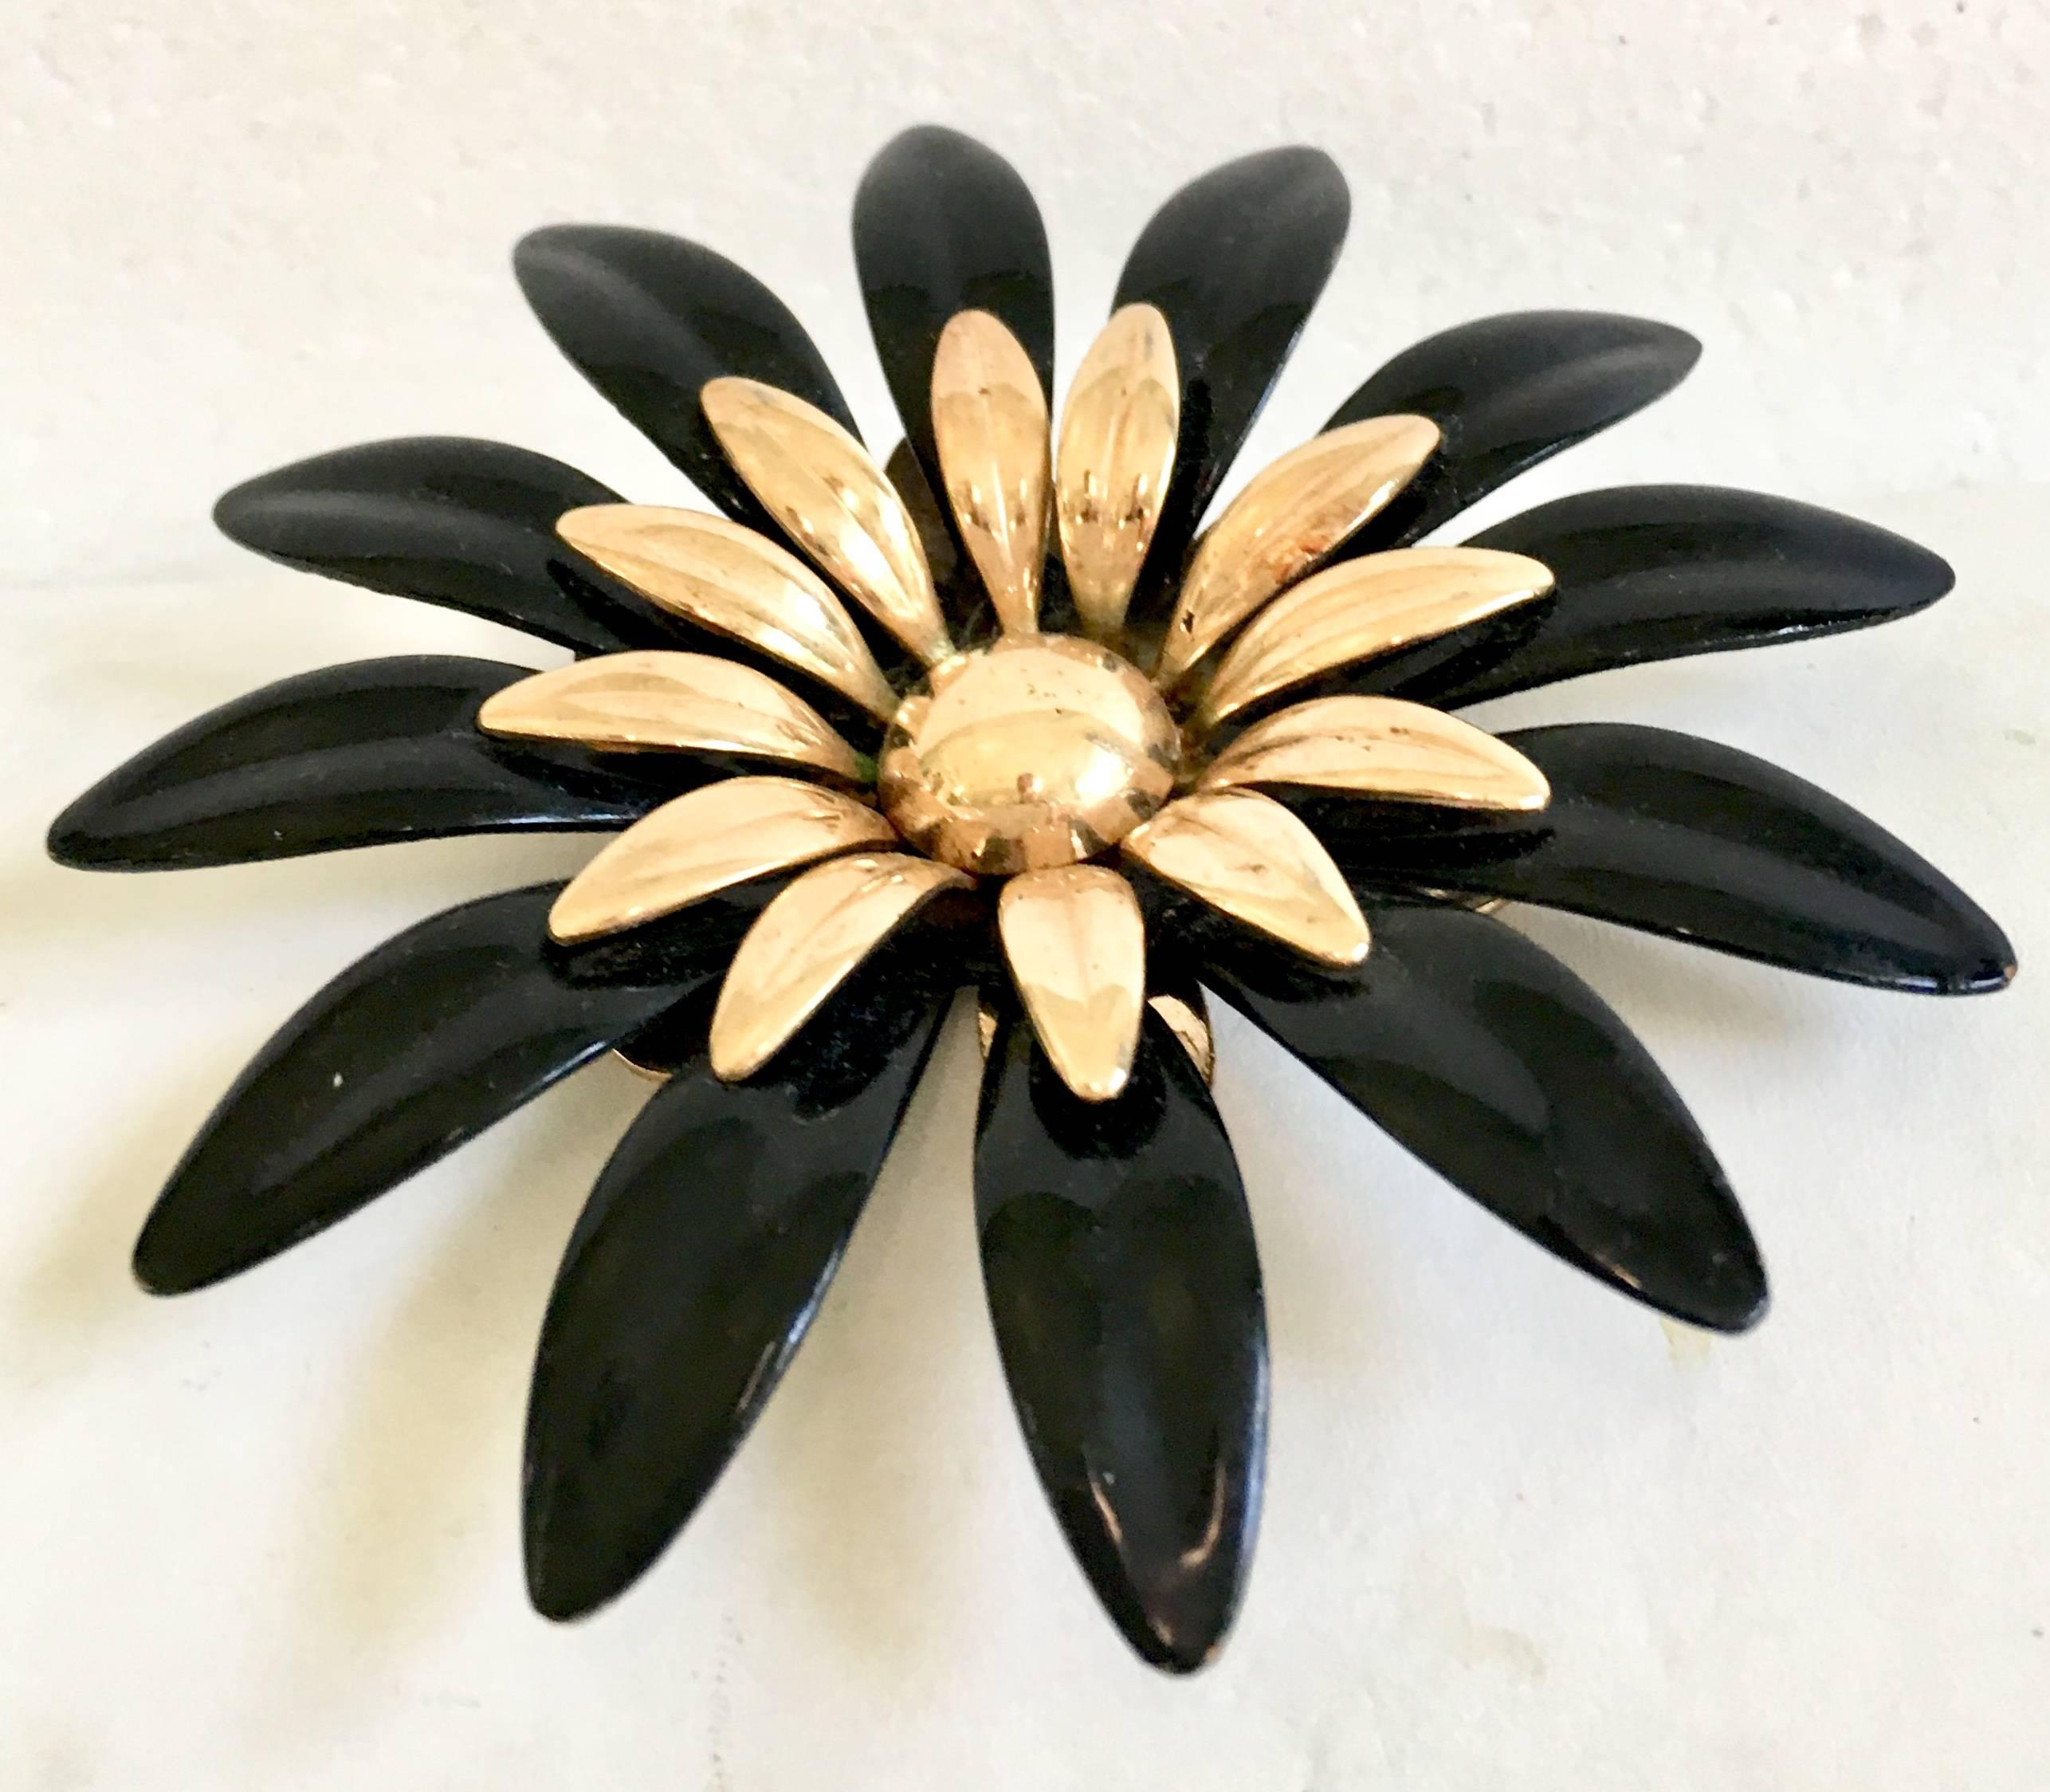 70'S Black Enamel & Gold Plate Oversized Dimensional Flower Brooch By, Sarah Coventry.
Signed on the underside, Sarah Cov.